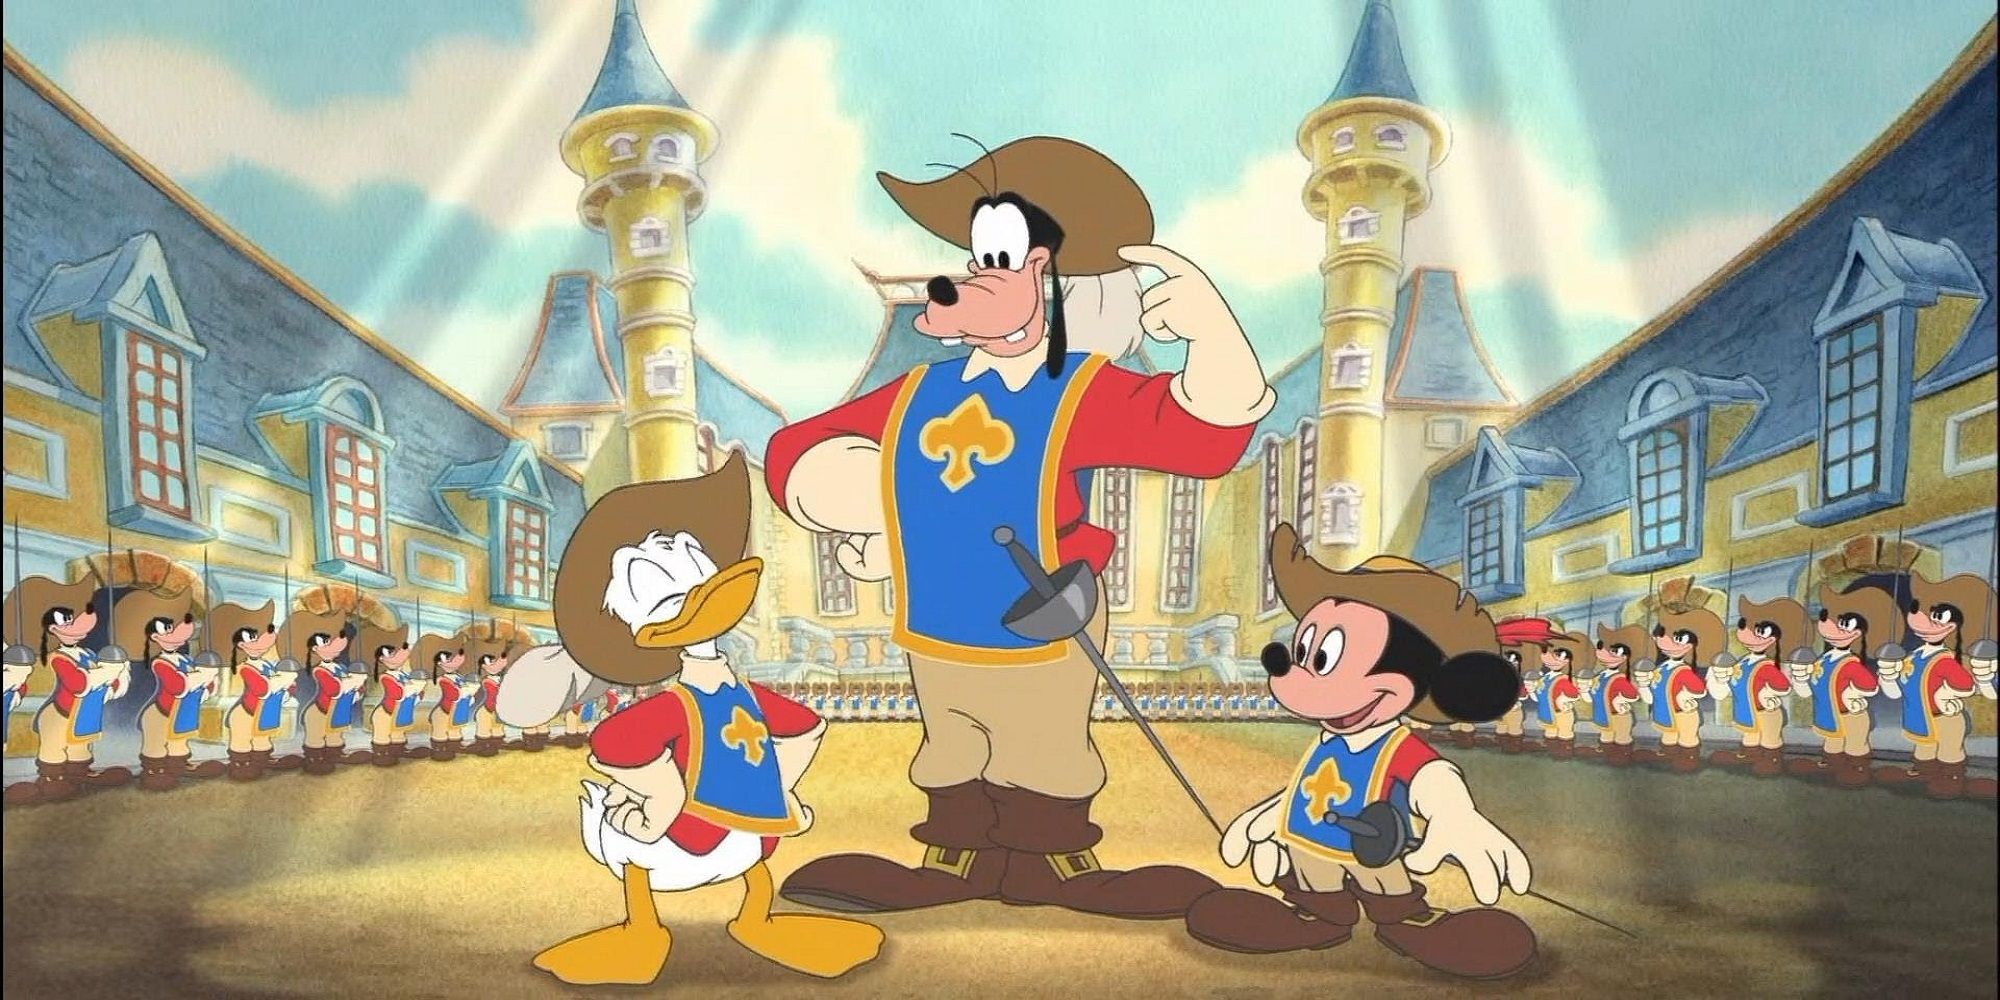 Mickey, Donald, and Goofy assume the roles of Musketeers in The Three Musketeers